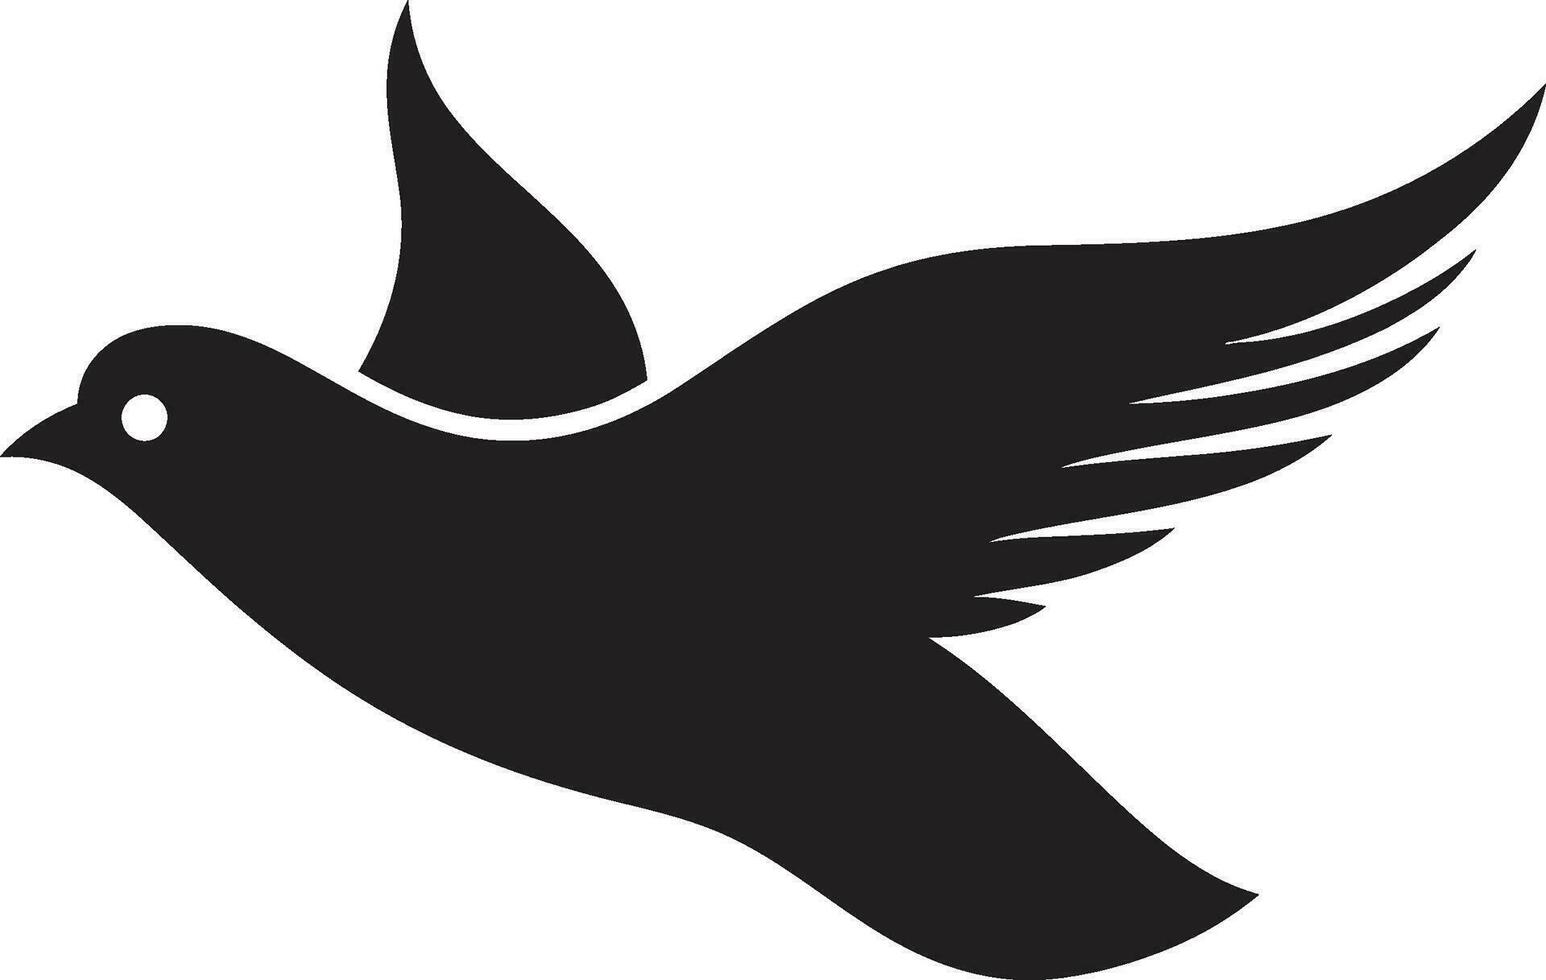 Black Dove Vector Logo with Swoosh and Calligraphic Background A Beautiful and Elegant Design Black Dove Vector Logo A Symbol of Peace, Hope, and Love